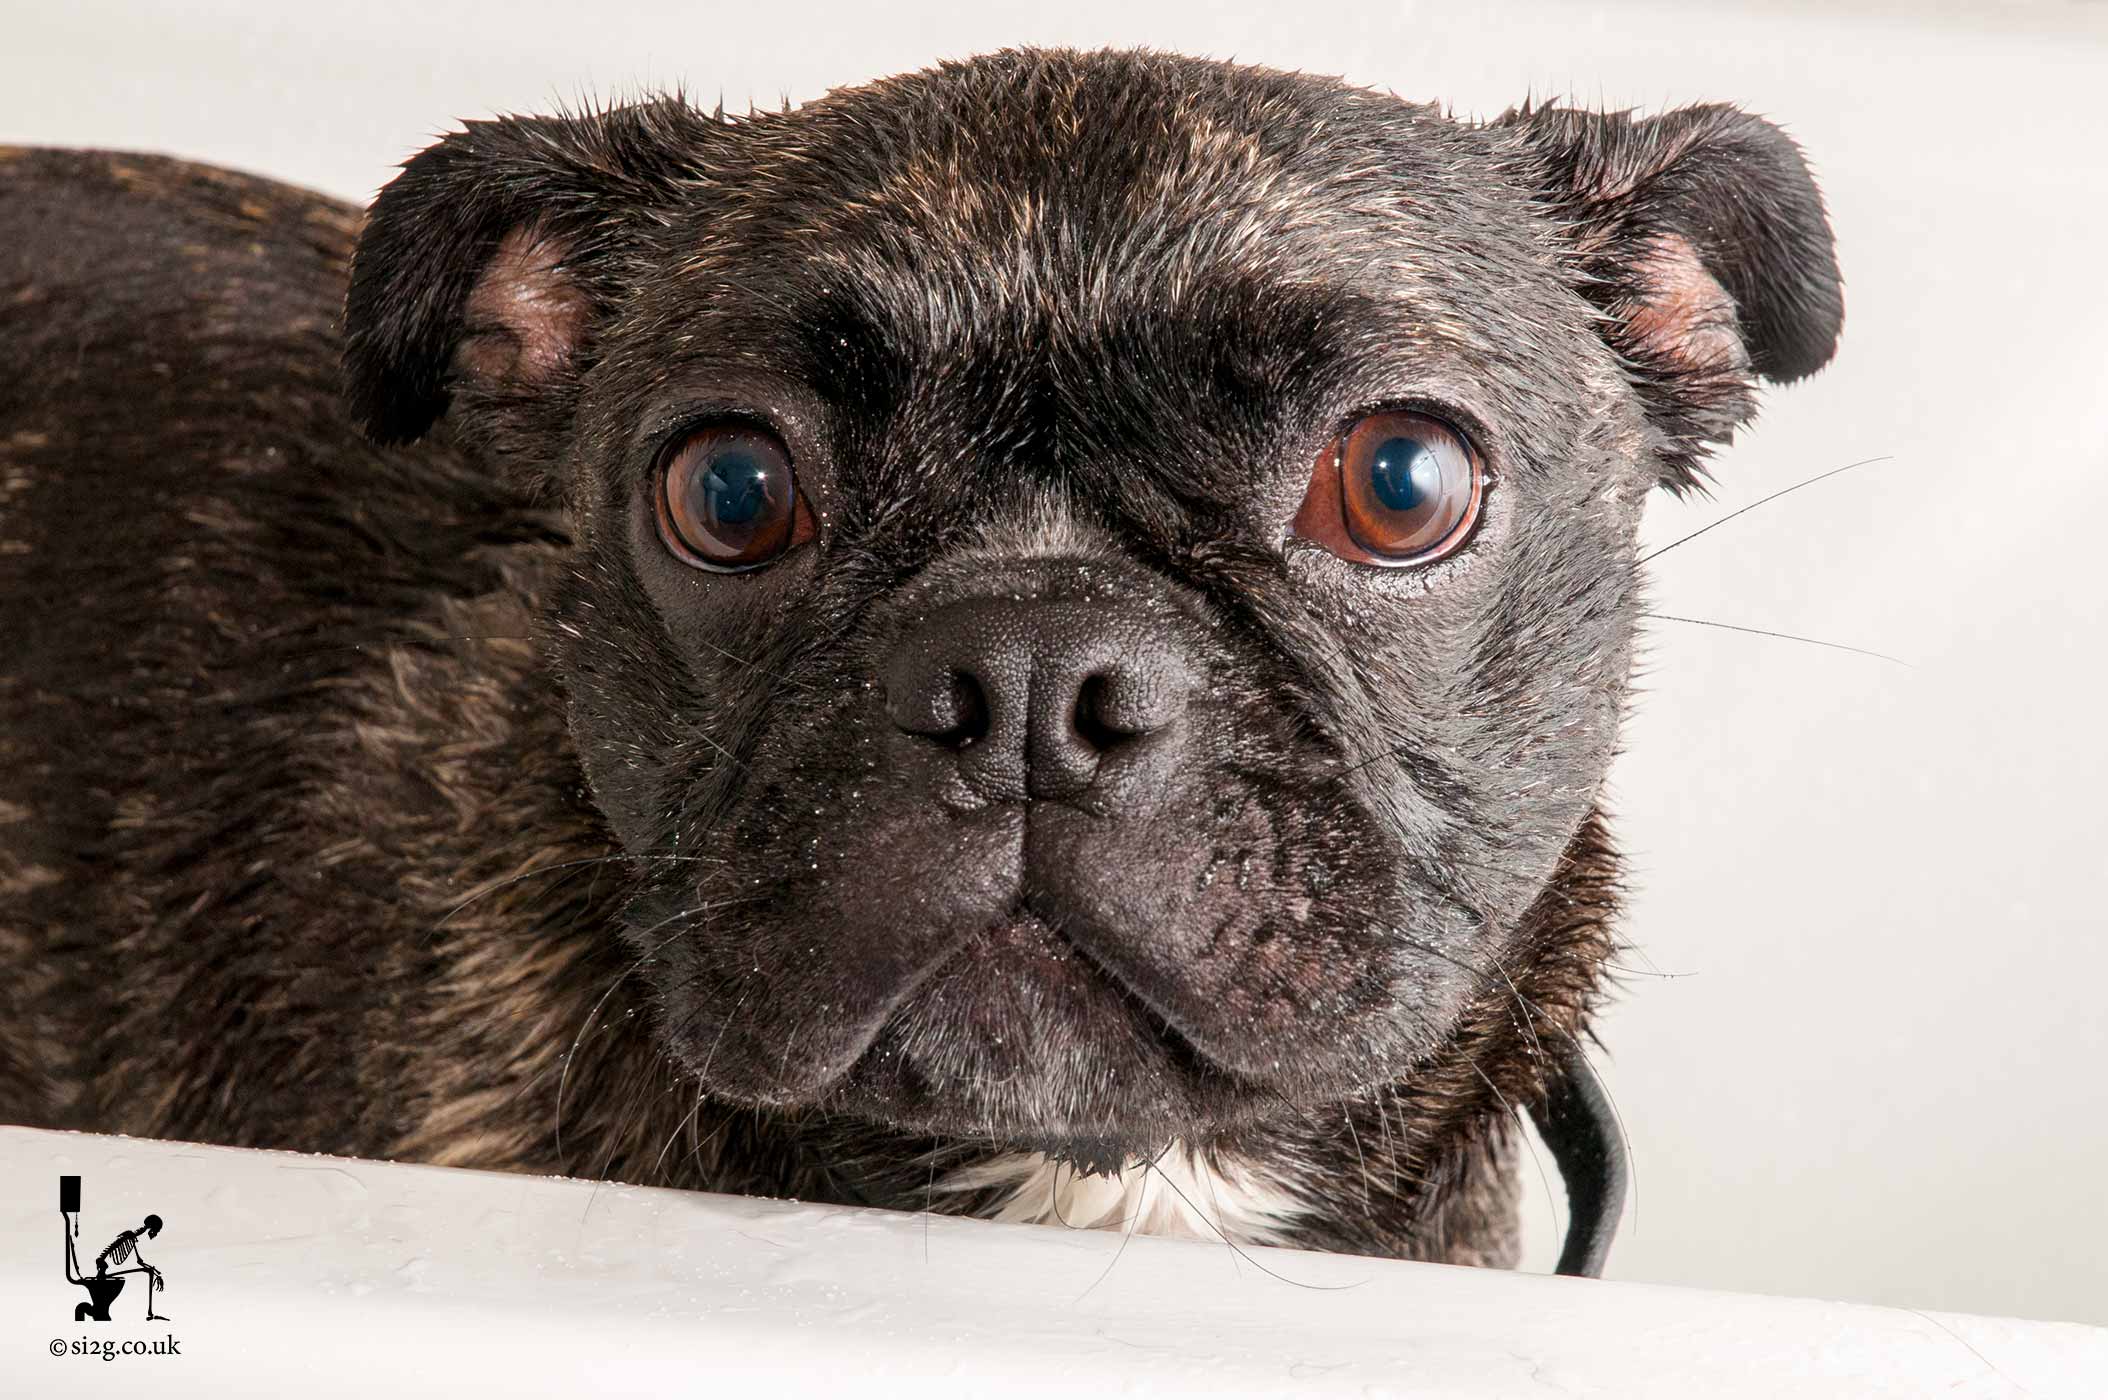 Naughty Doggy - Still, to this day, the naughtiest little doggy in the world - EVER!  This cross between a Pug and a Boston Terrier, often known as a Bug, stands in a bath tub after having a bath.